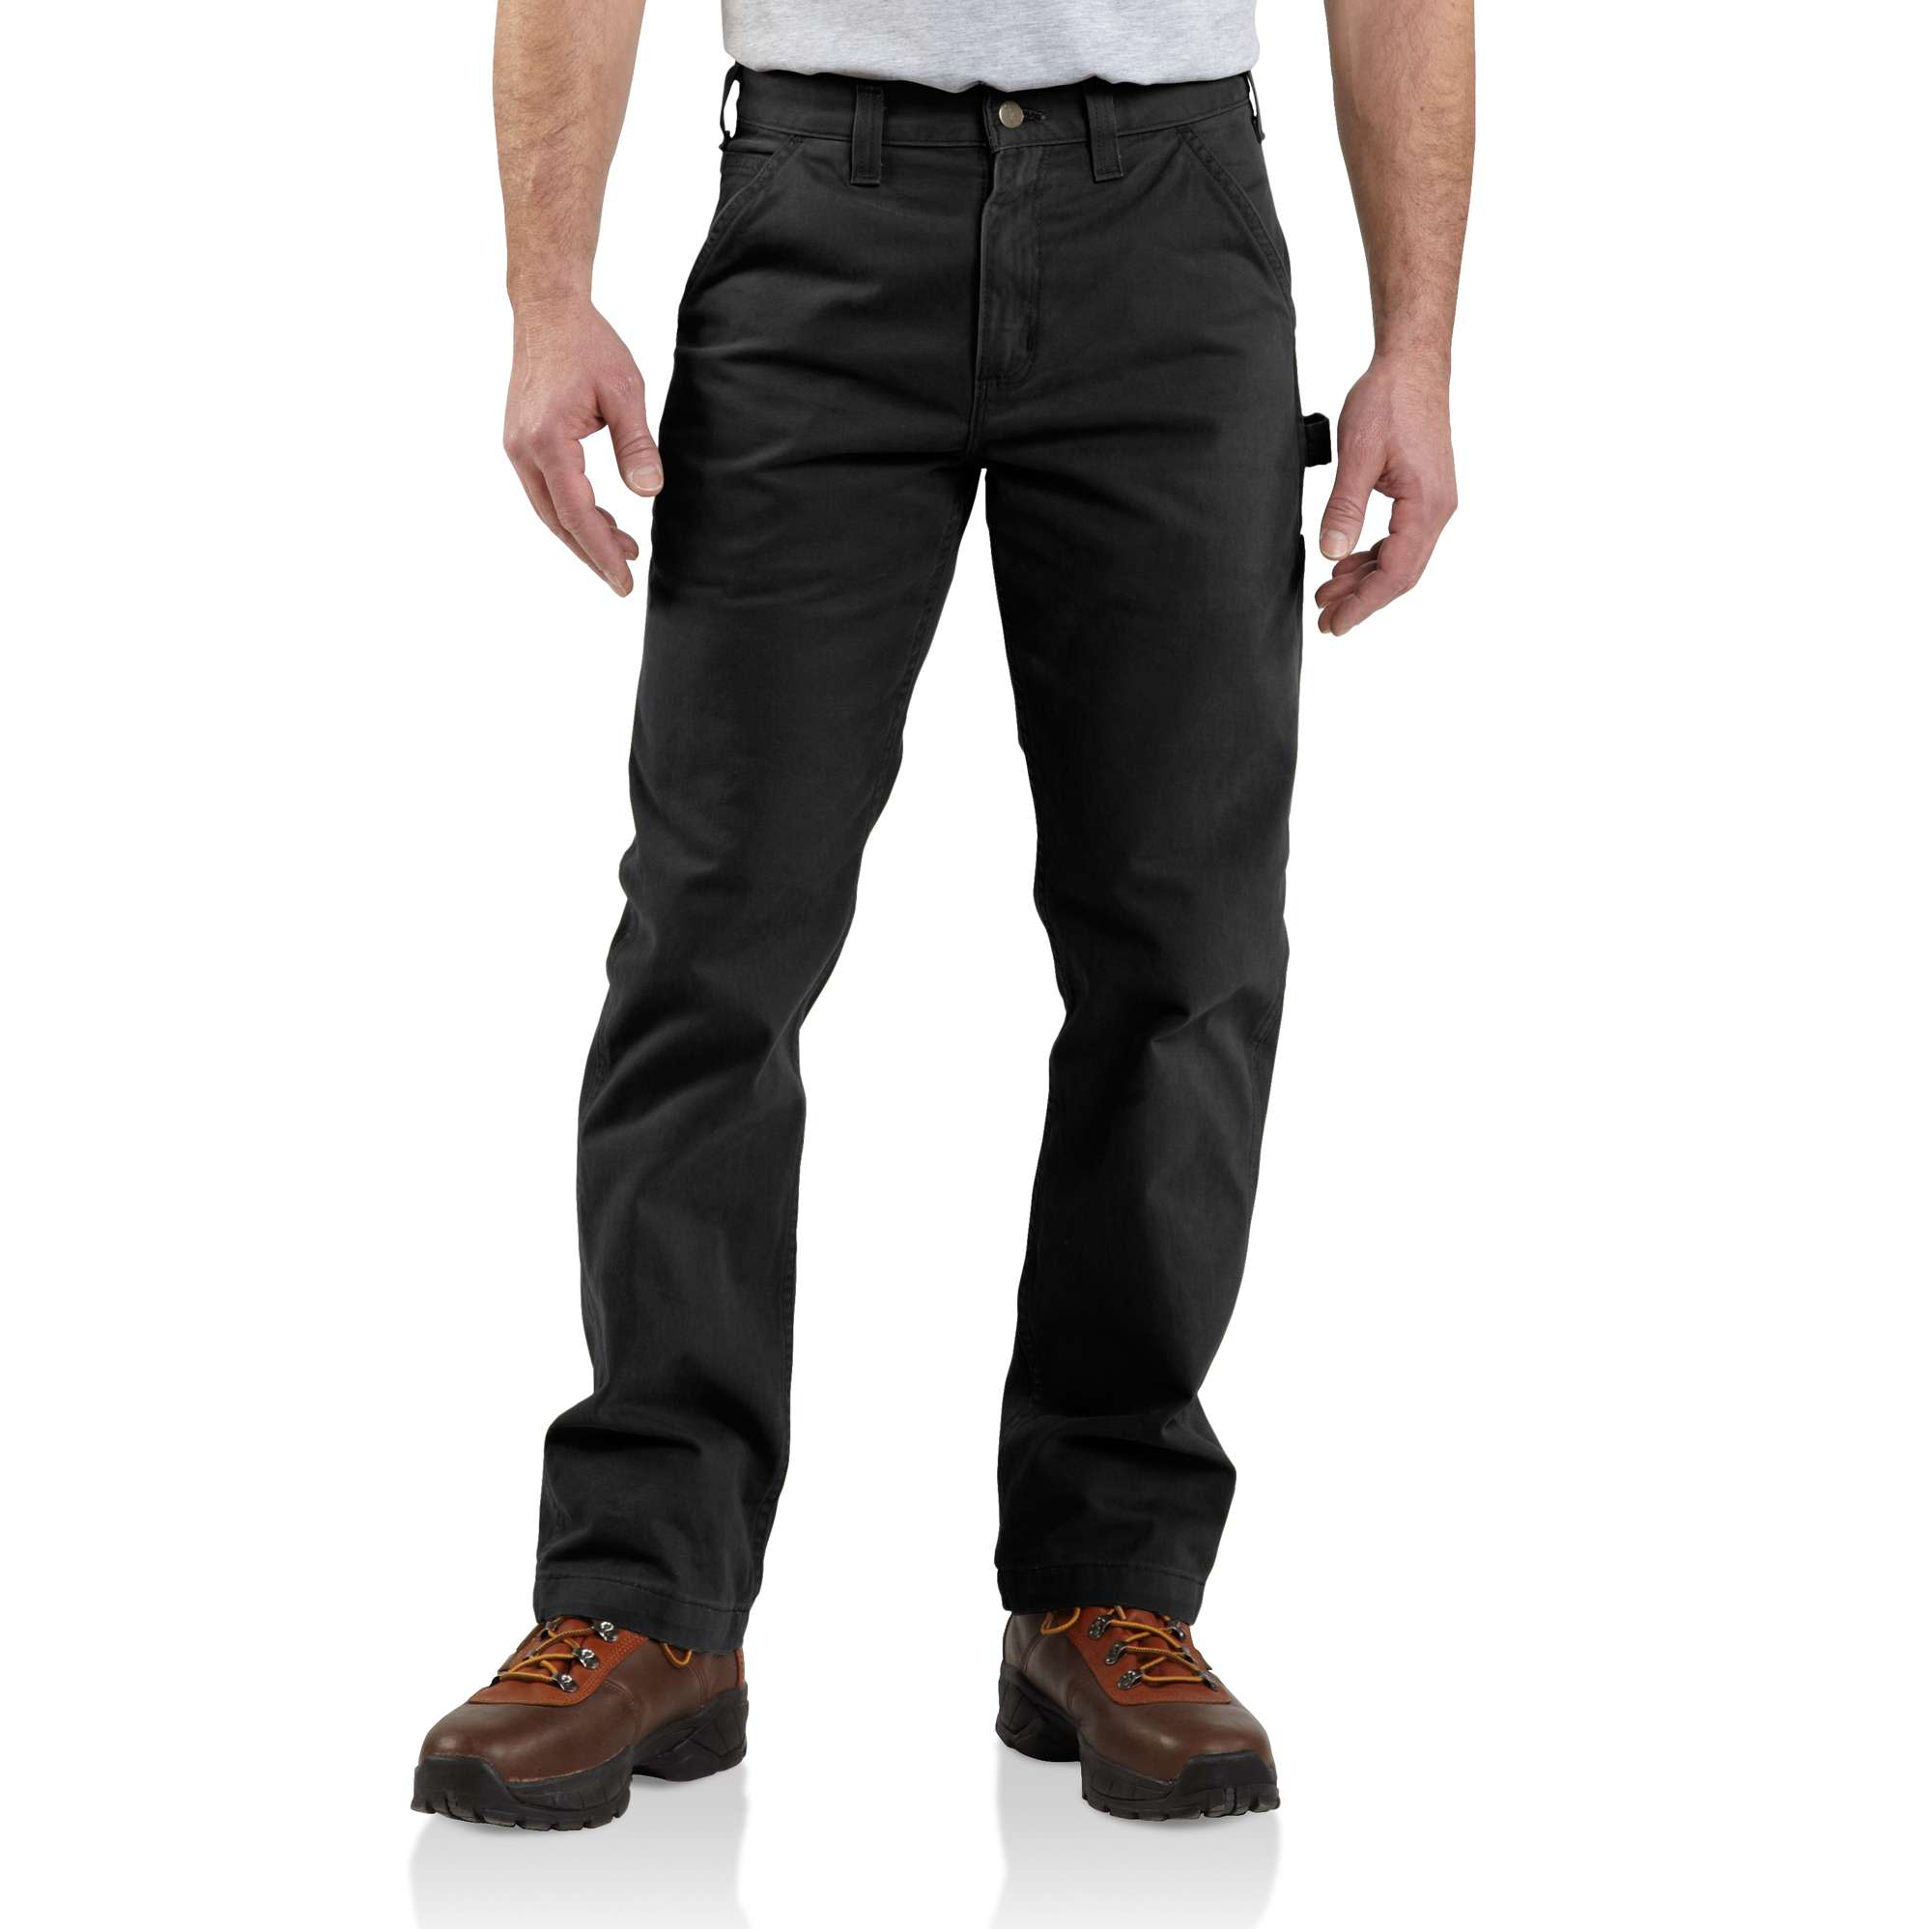 Loose Fit Washed Duck Utility Work Pant | Carhartt Reworked